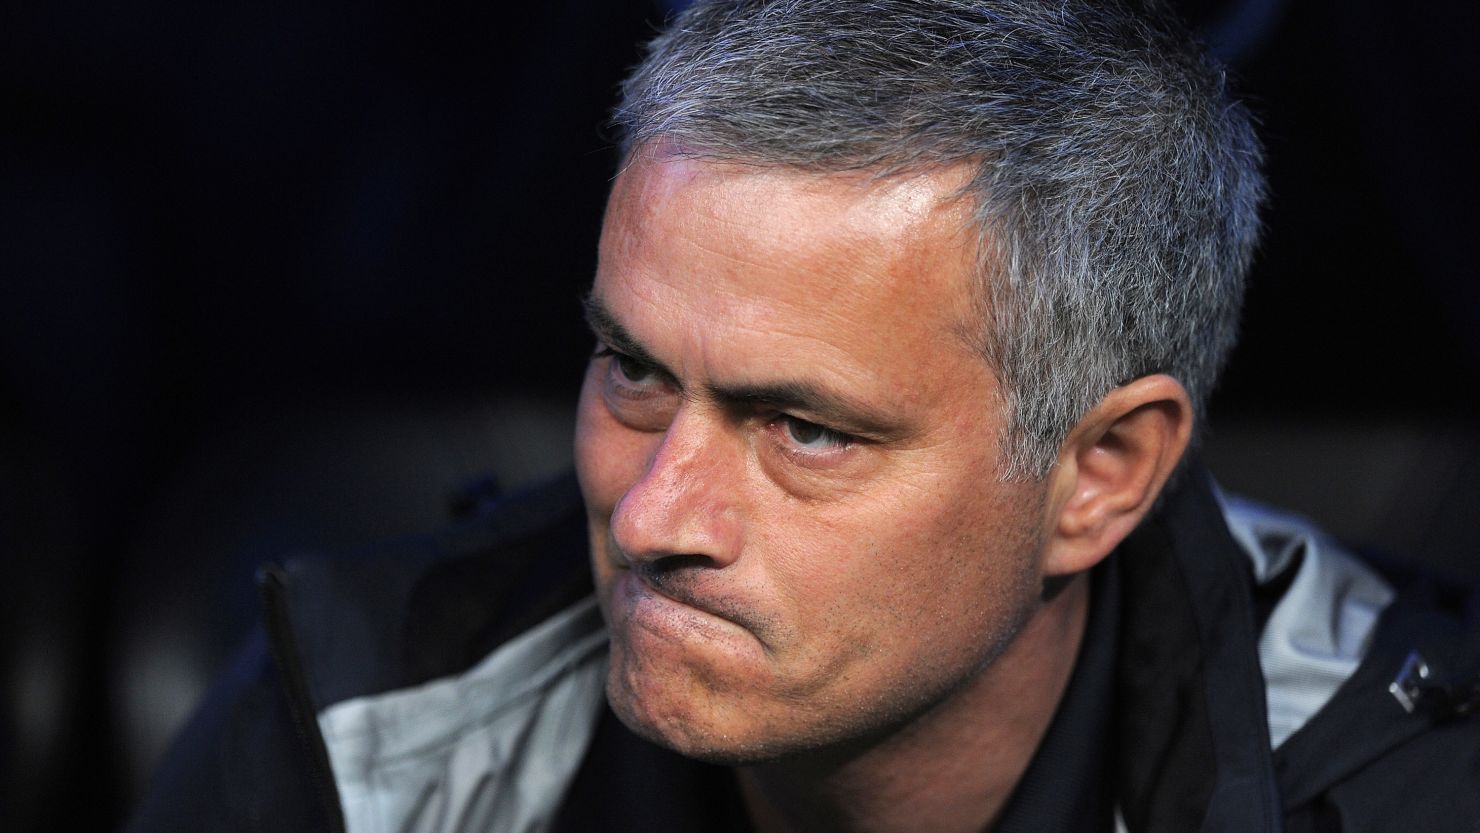 Jose Mourinho will leave Madrid at the end of the season after three years in charge